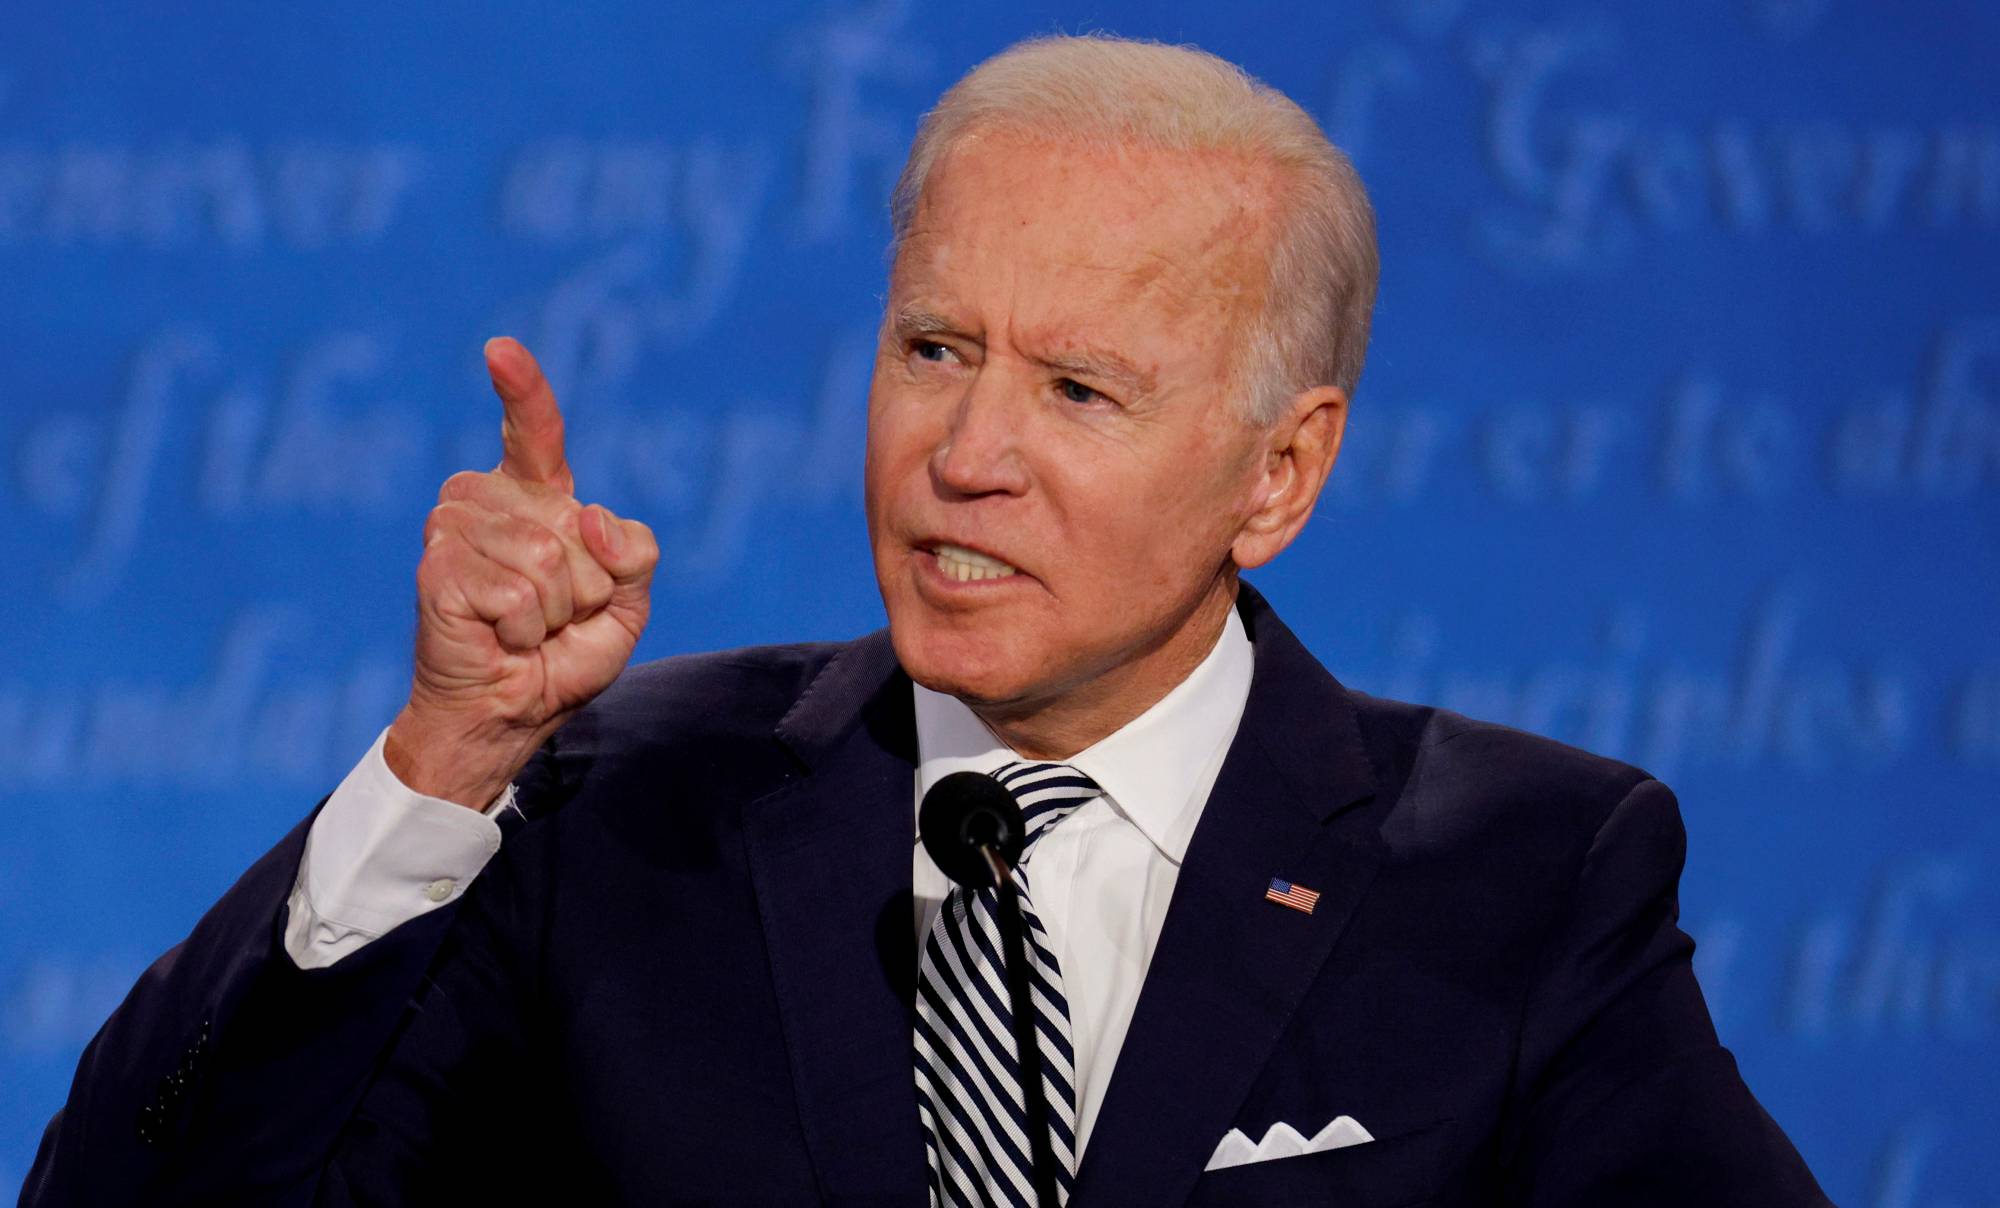 Warning from Biden's report that could trigger World War III